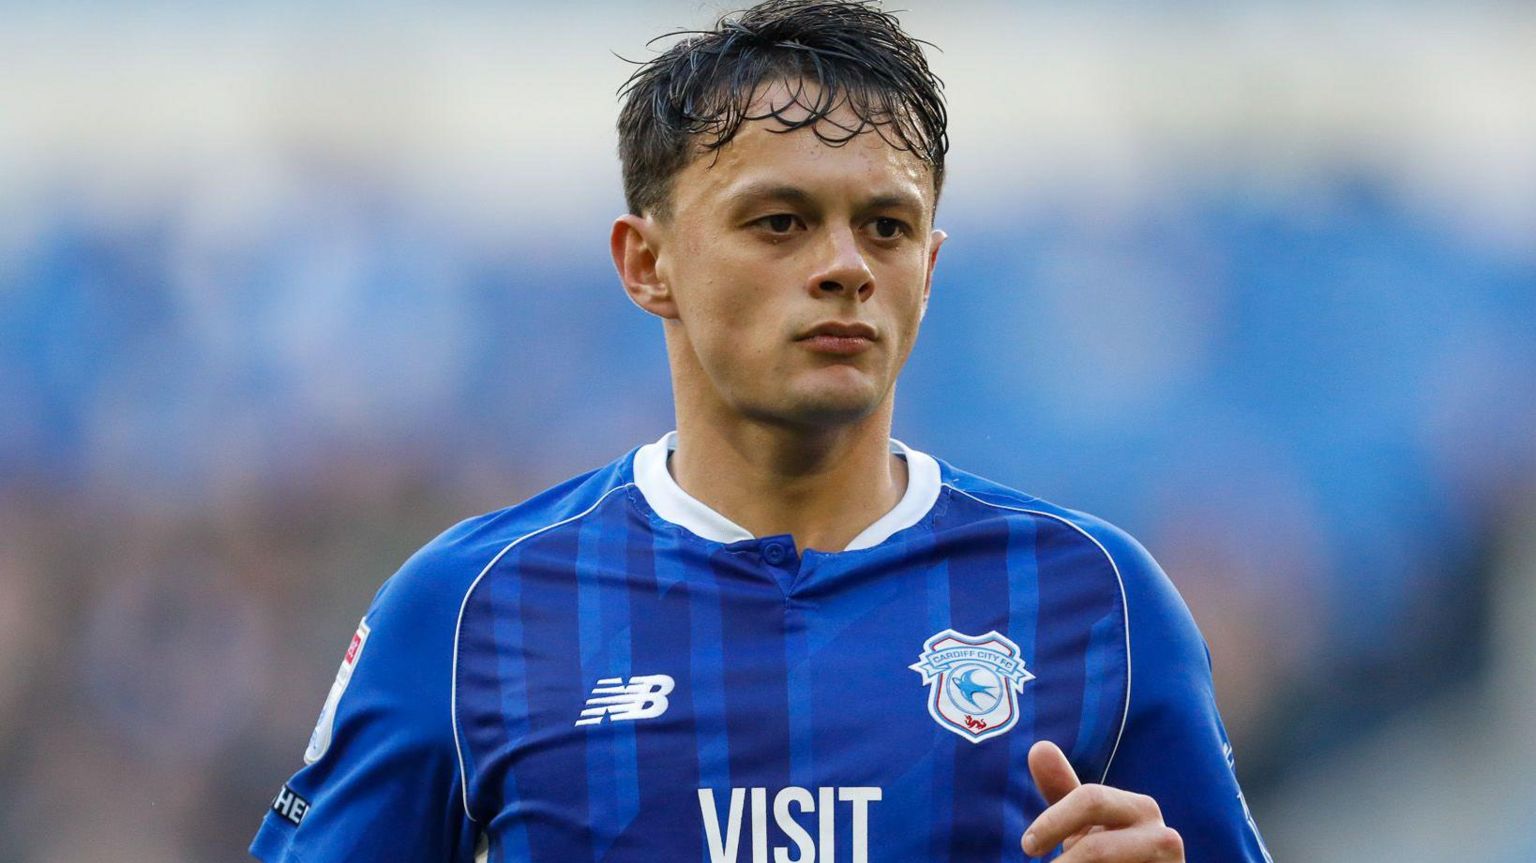 Cardiff City: Perry Ng makes Championship team of the season - BBC Sport